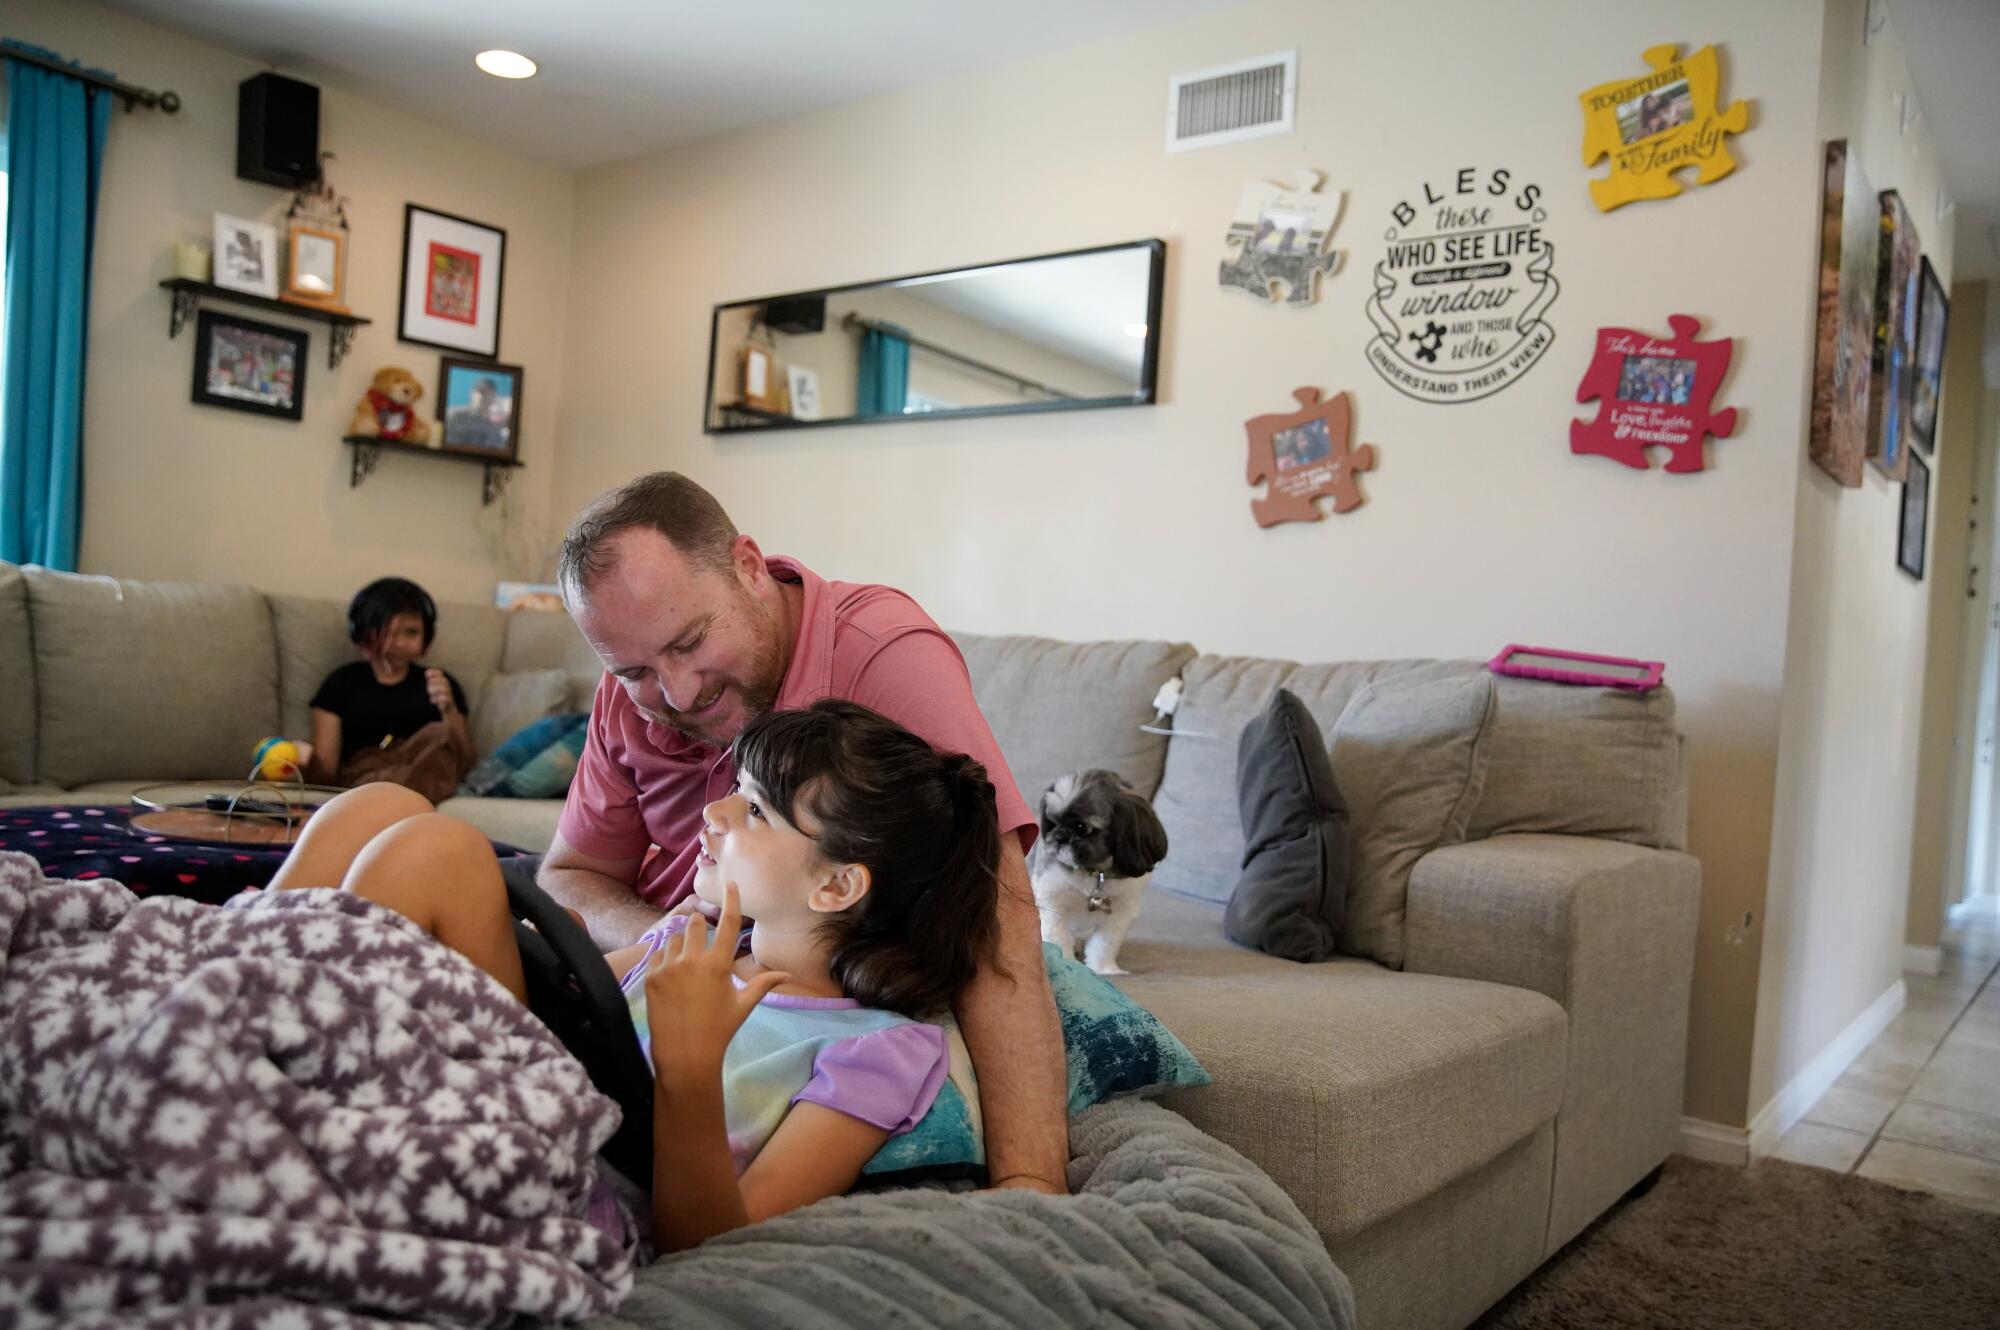 A dad talks to his daughter on a bean bag chair while another daughter sits on a couch.